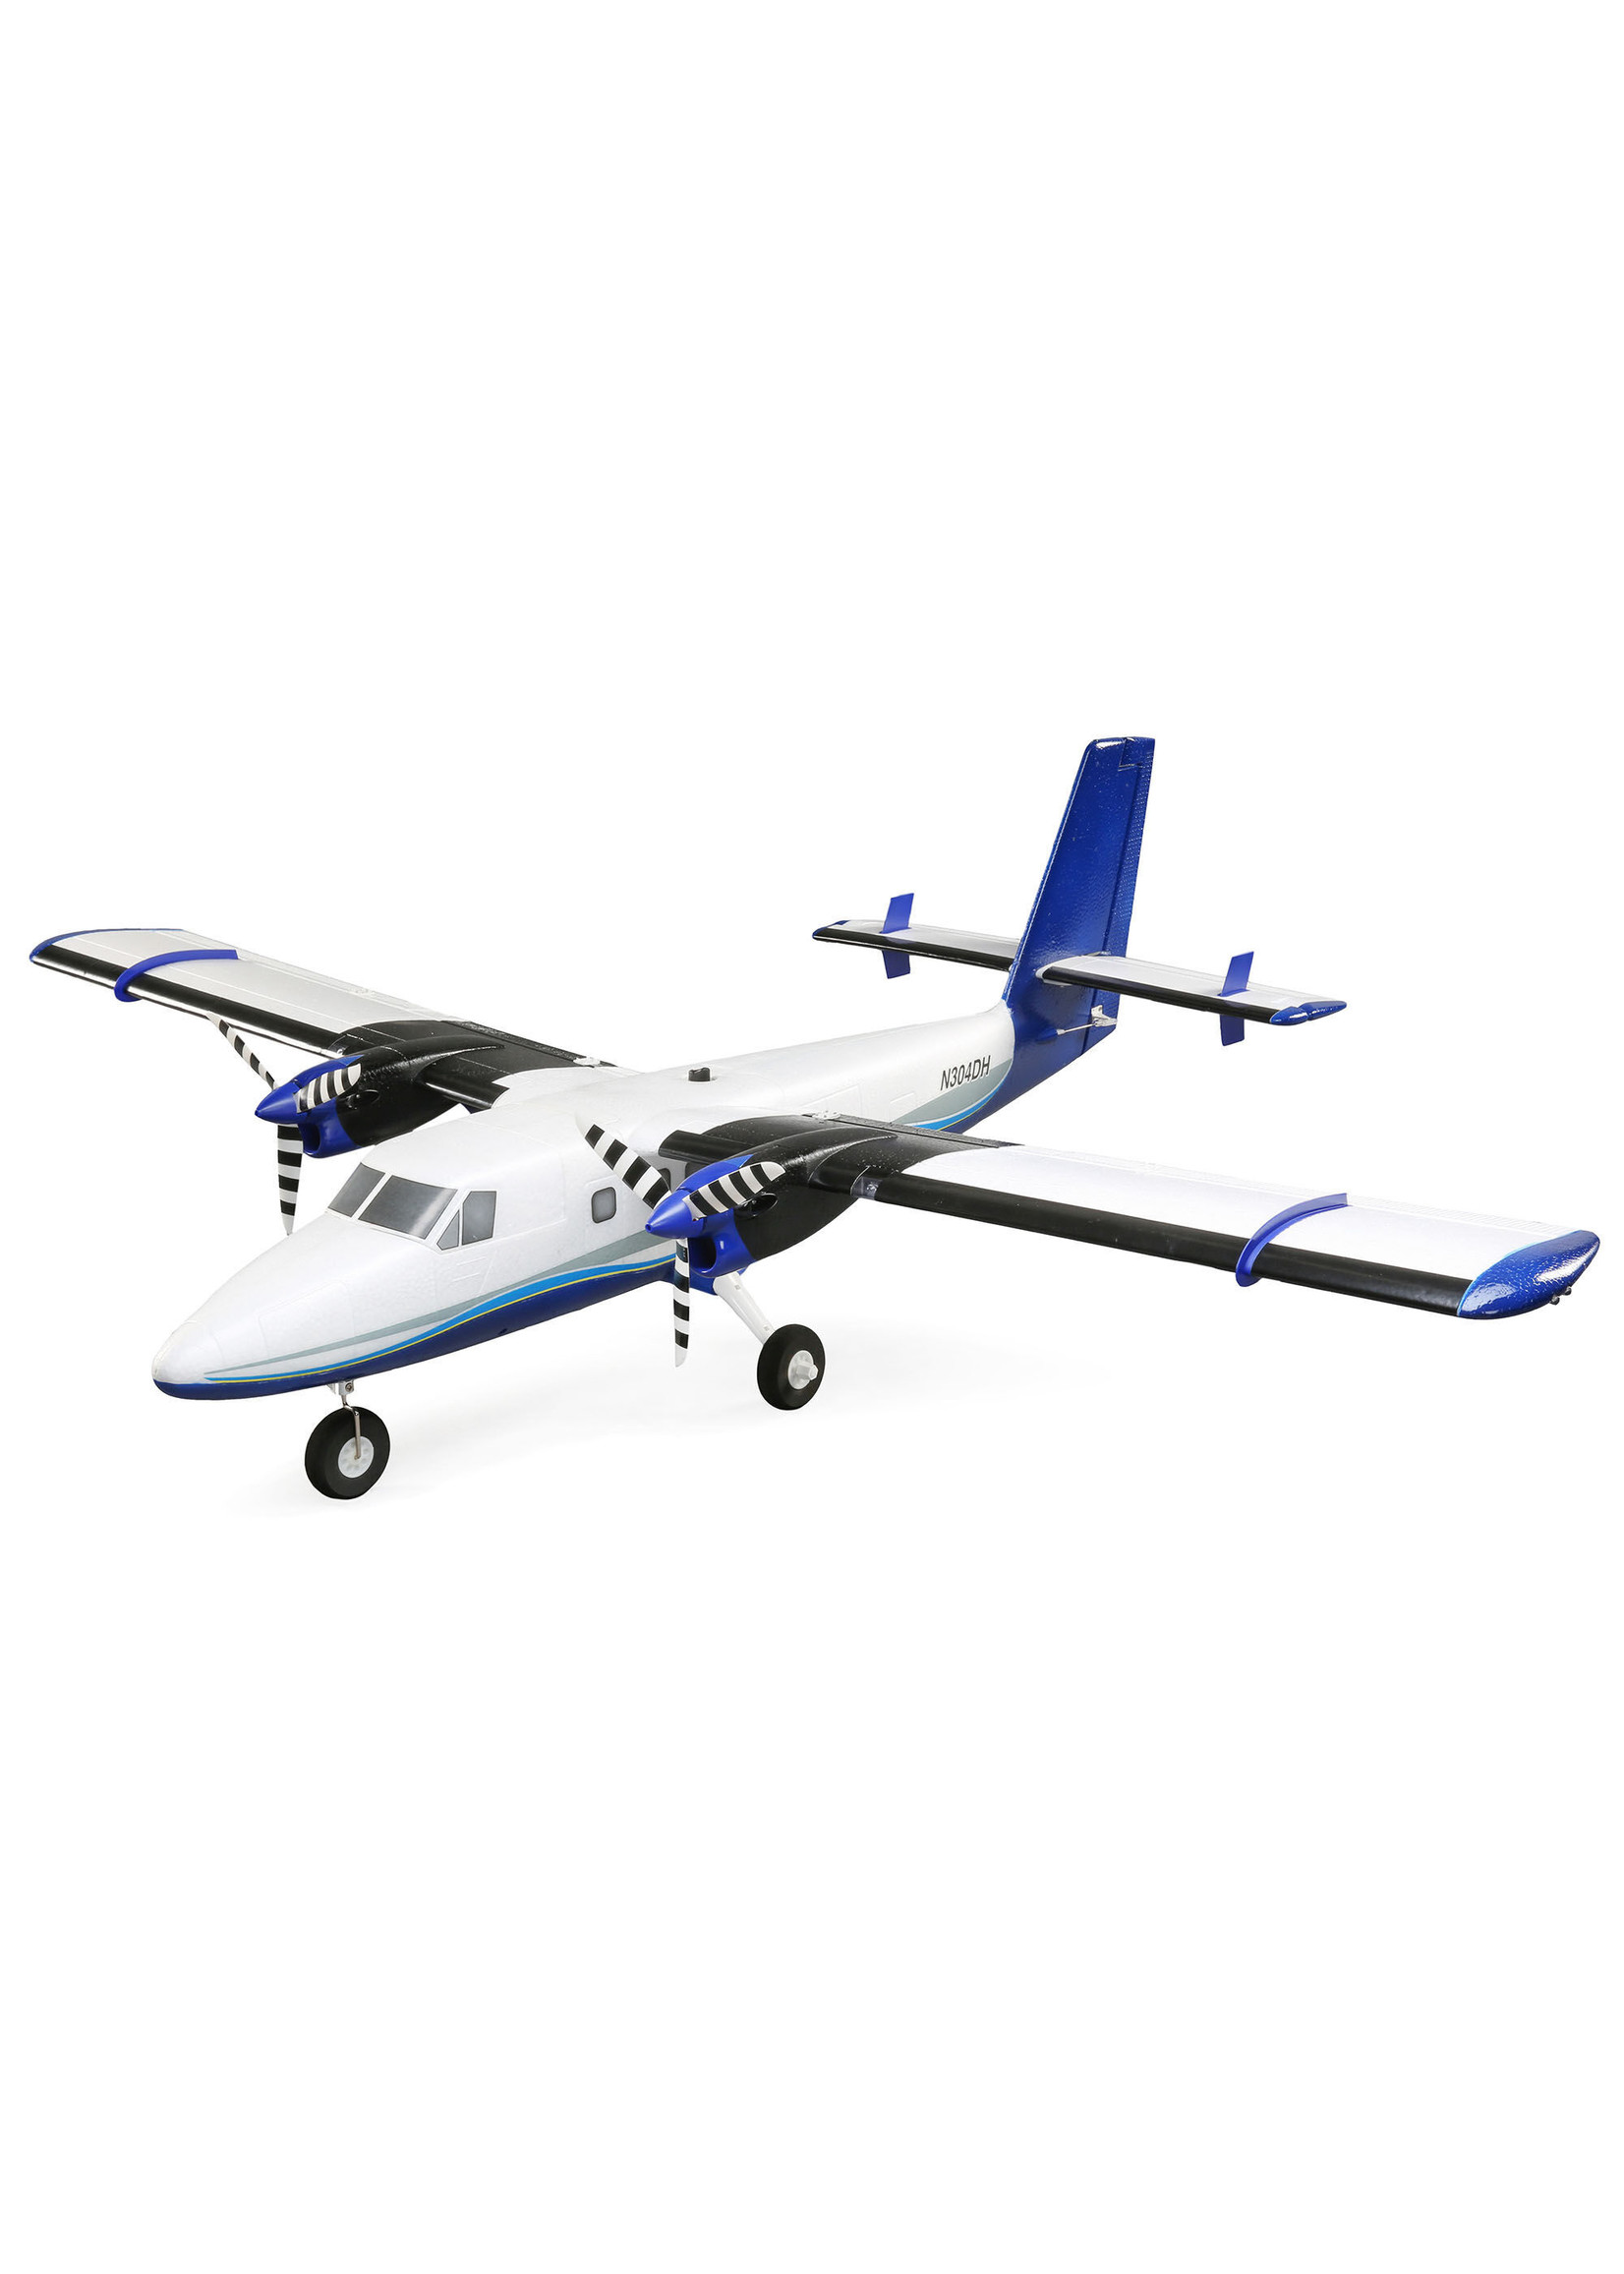 E-flite Twin Otter 1.2m BNF Basic with AS3X and SAFE - Includes Floats